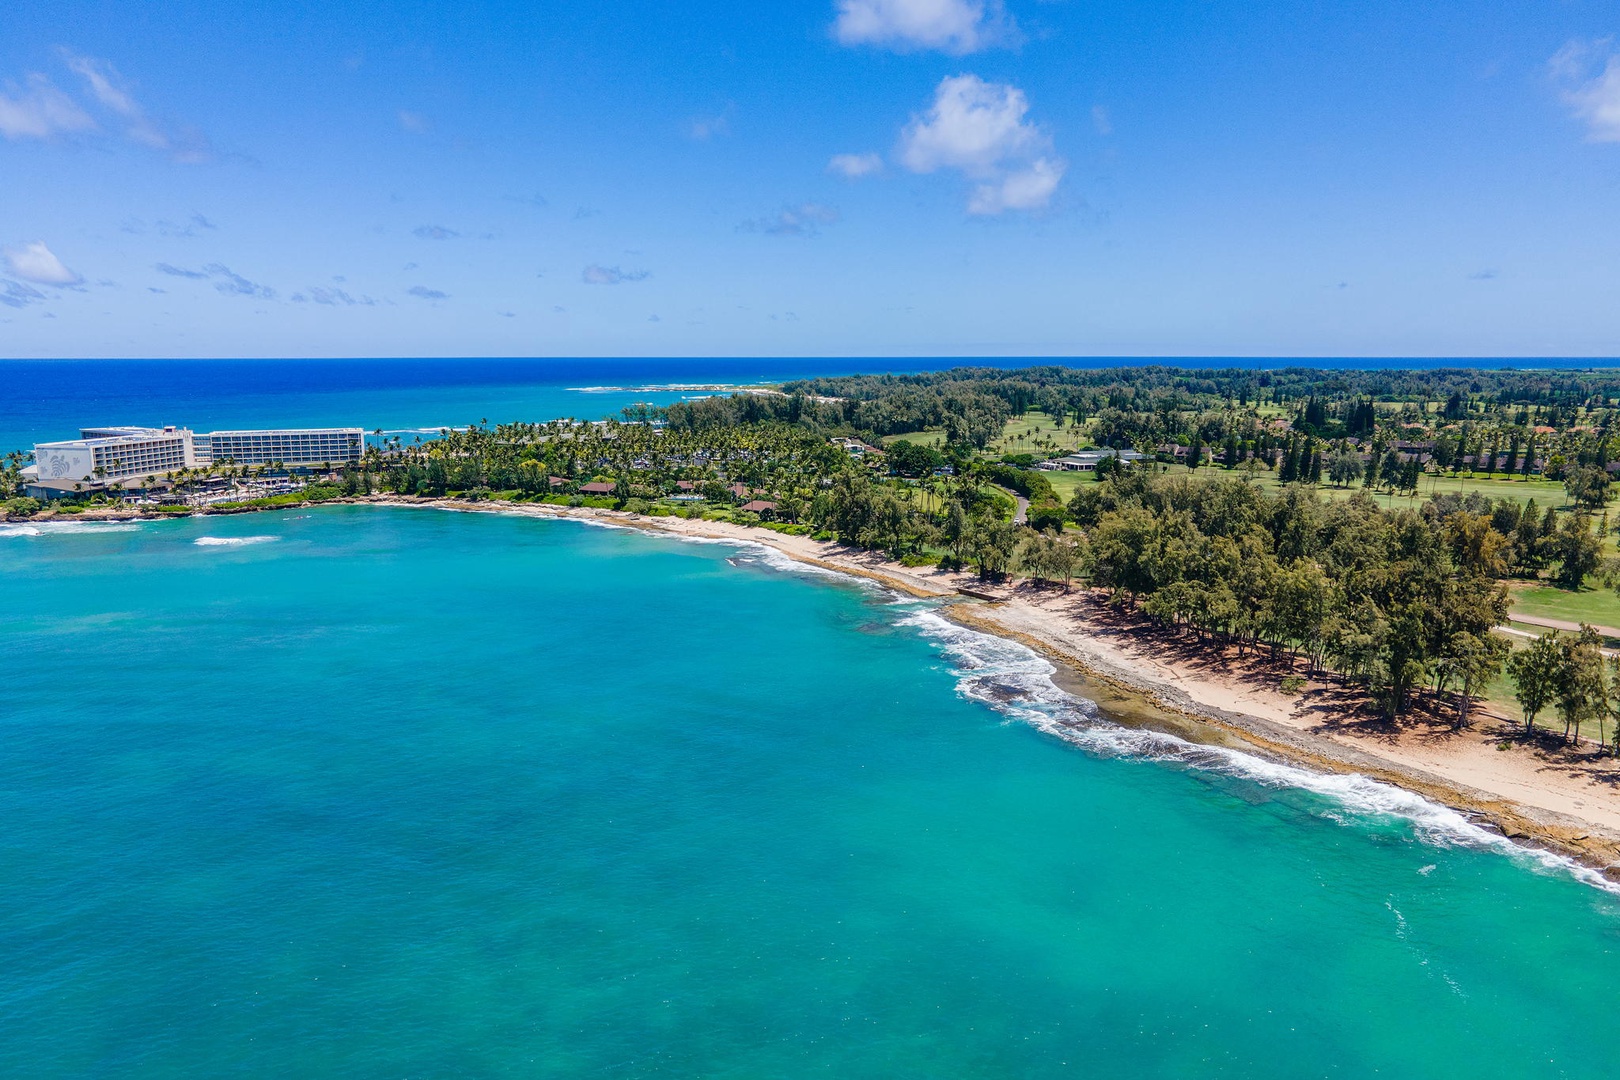 Kahuku Vacation Rentals, Turtle Bay's Kuilima Estates West #104 - Kuilima Estates West is just steps away from a sandy lagoon.